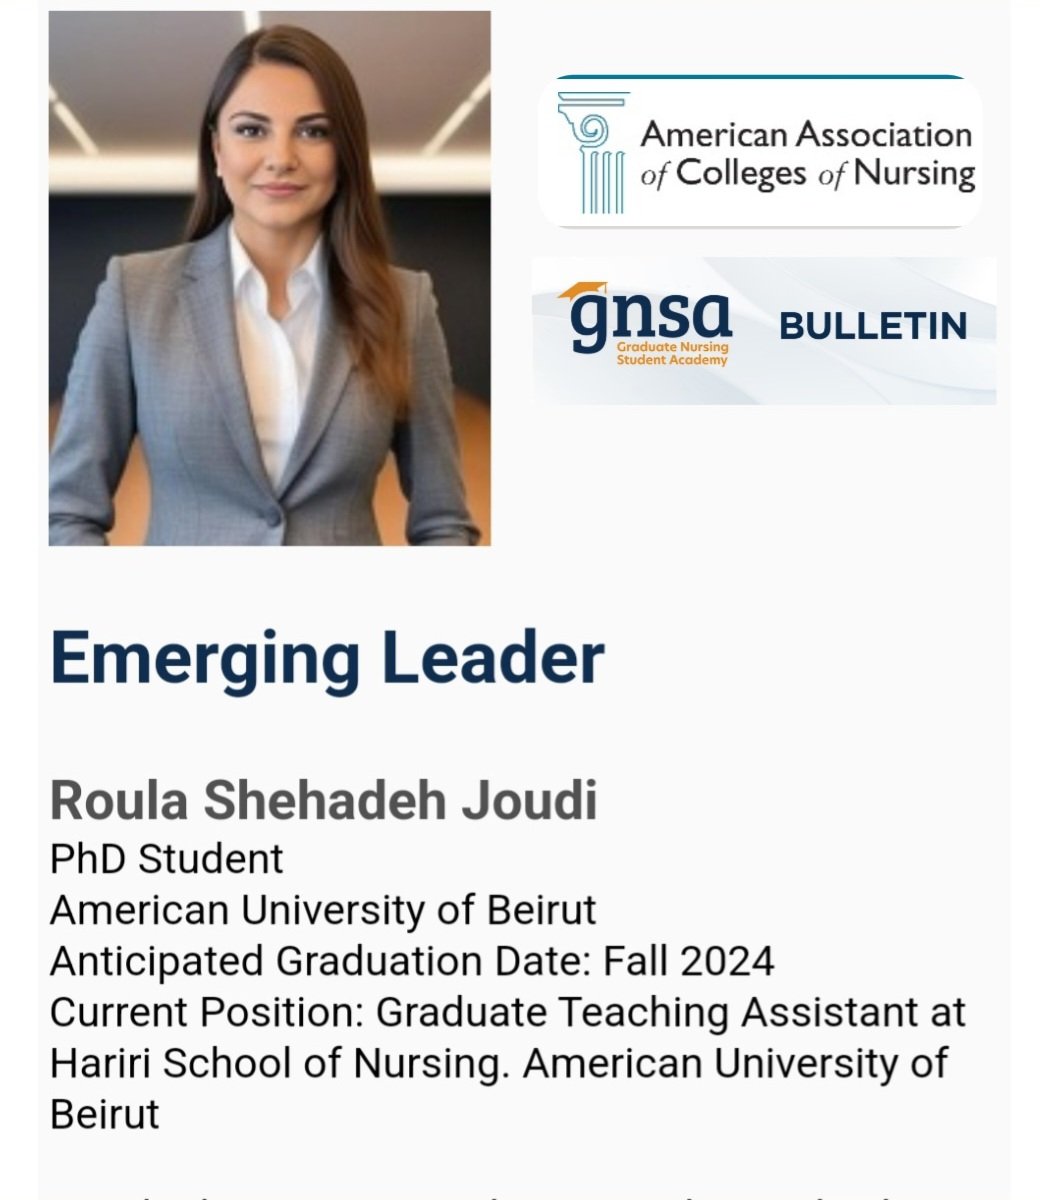 Emerging Leader Feature #GNSA #AACN
I am thrilled to have been chosen from a pool of numerous candidates across the United States, and to have had the opportunity to represent our #HSON at the AACN.

#Nursing
#phdcandidate
#nursinggradstudent